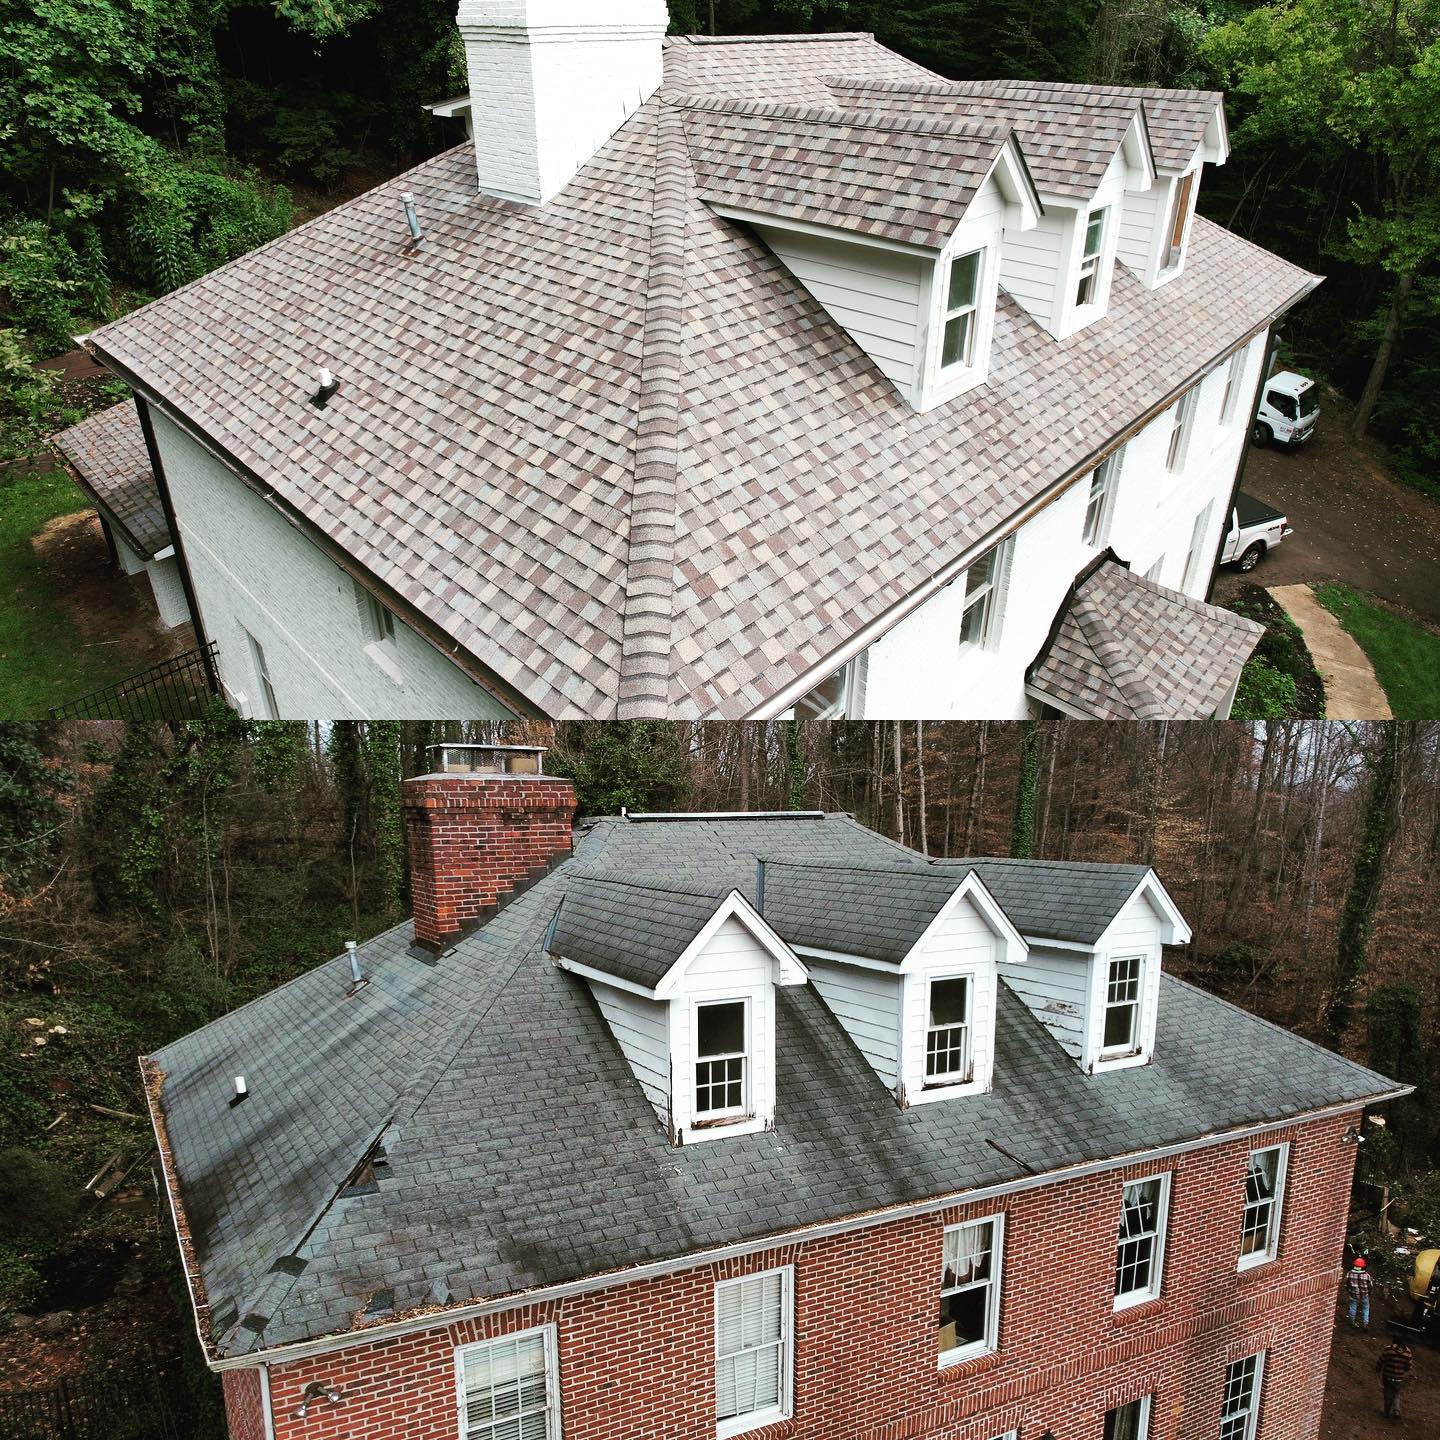 New roof installation compared to the old roof. Newly installed by Mountain View Exteriors.